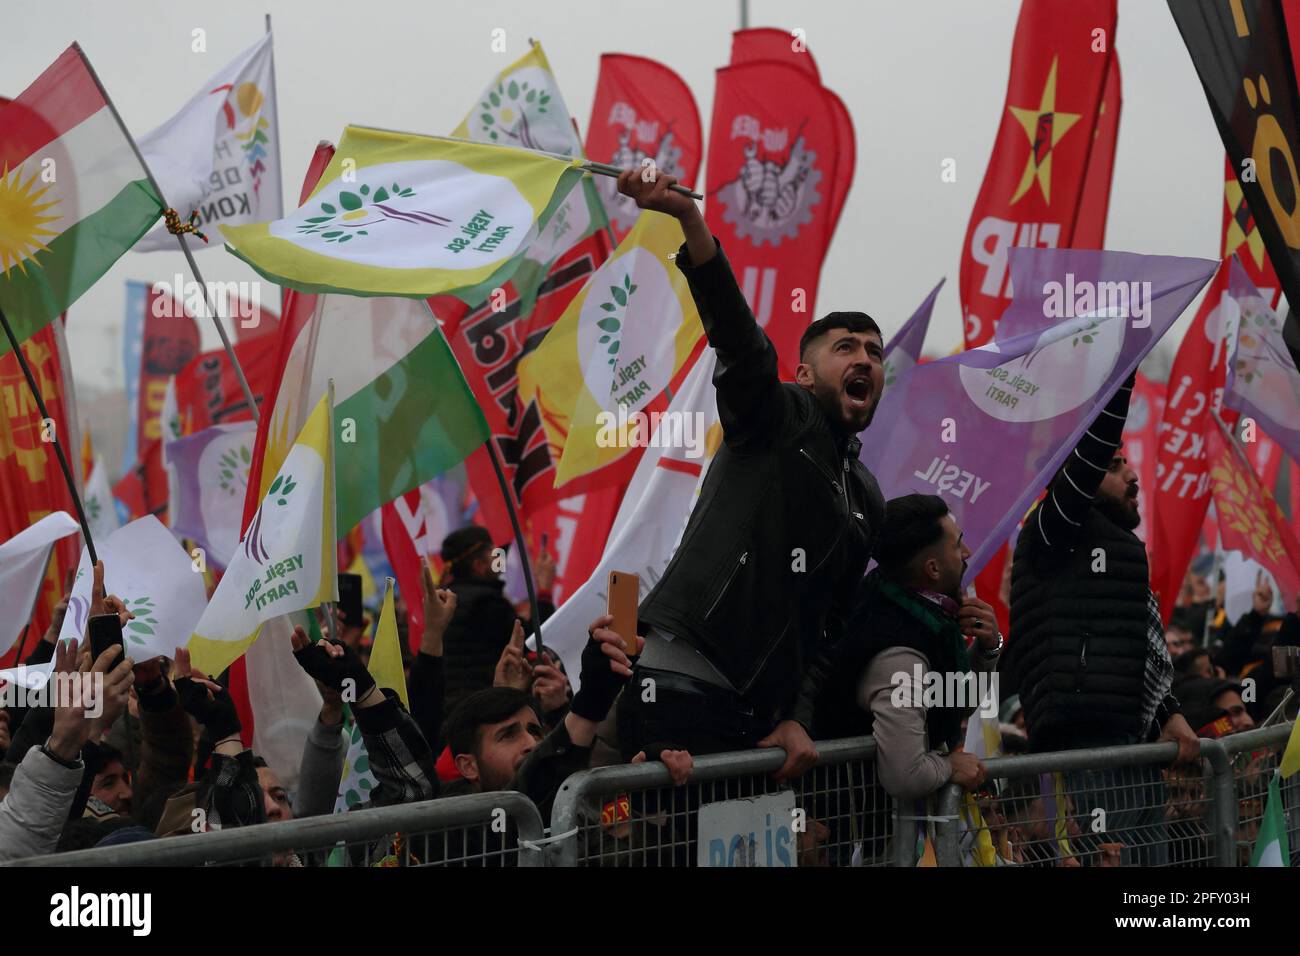 A man waves Green Left Party flags during a rally to celebrate Nowruz, which marks the arrival of spring, in Istanbul, Turkey March 19, 2023. REUTERS/Murad Sezer Stock Photo